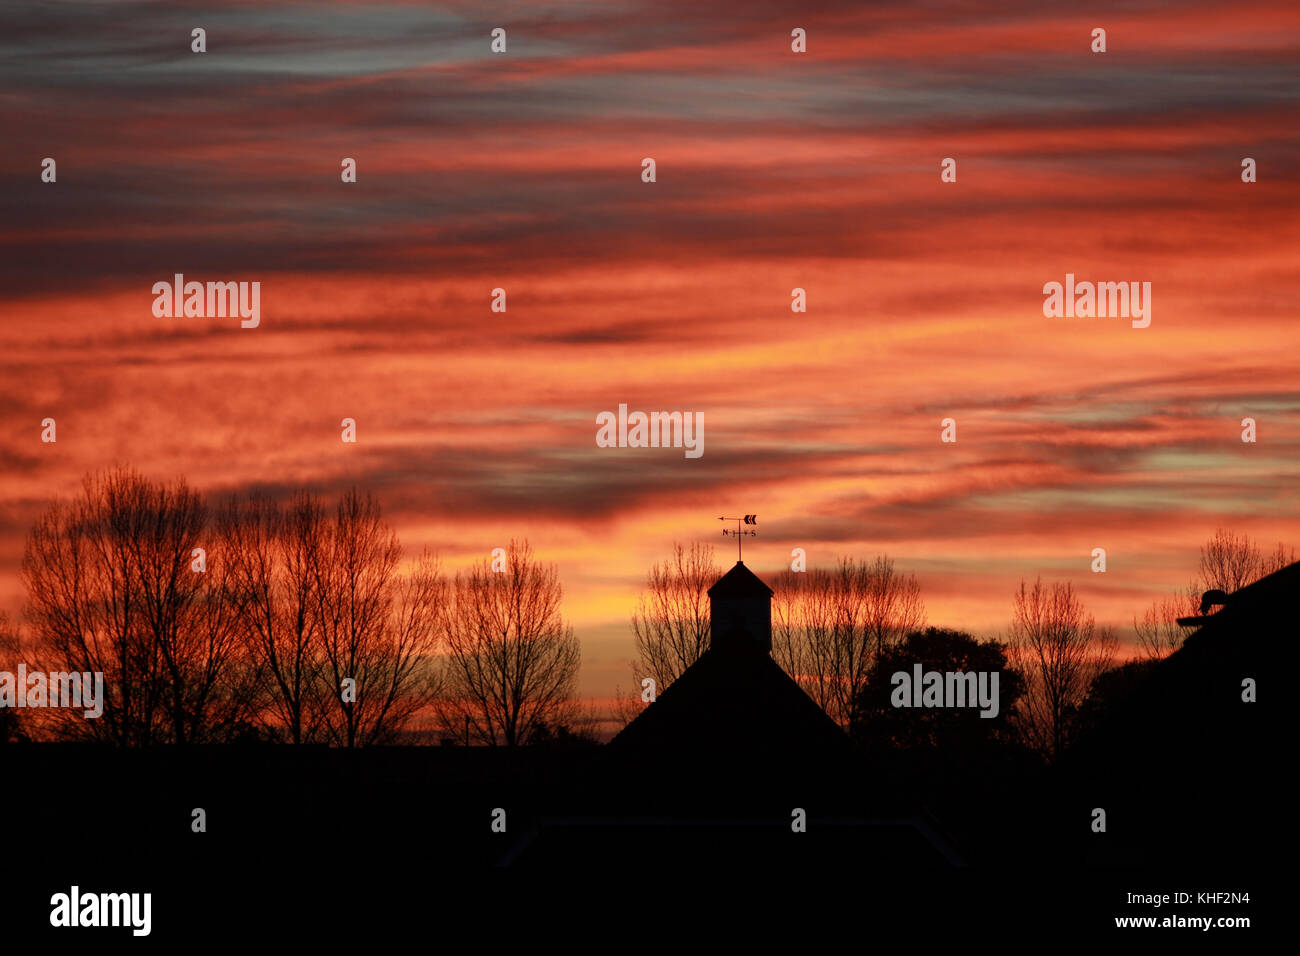 Ashford, Kent, UK. 17th November, 2017. A beautiful sunrise in the rural village of Hamstreet, Kent this morning. The day is expected to be cold but bright and sunny with cloudy intervals later. Photo Credit: Paul Lawrenson /Alamy Live News Stock Photo